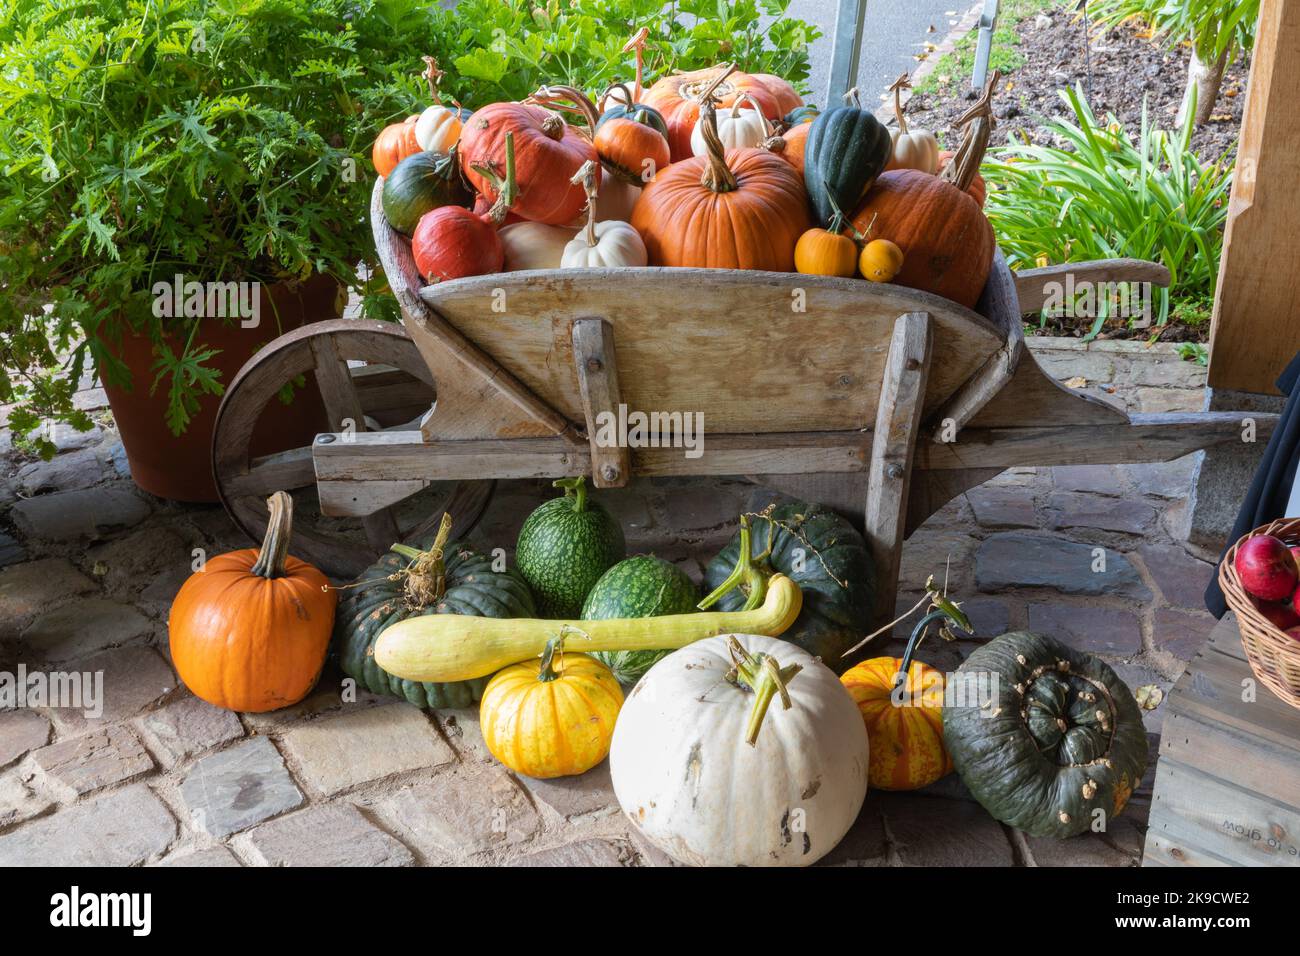 An autumn harvest display of seasonal pumpkins and squashes in old wooden garden wheelbarrow Stock Photo